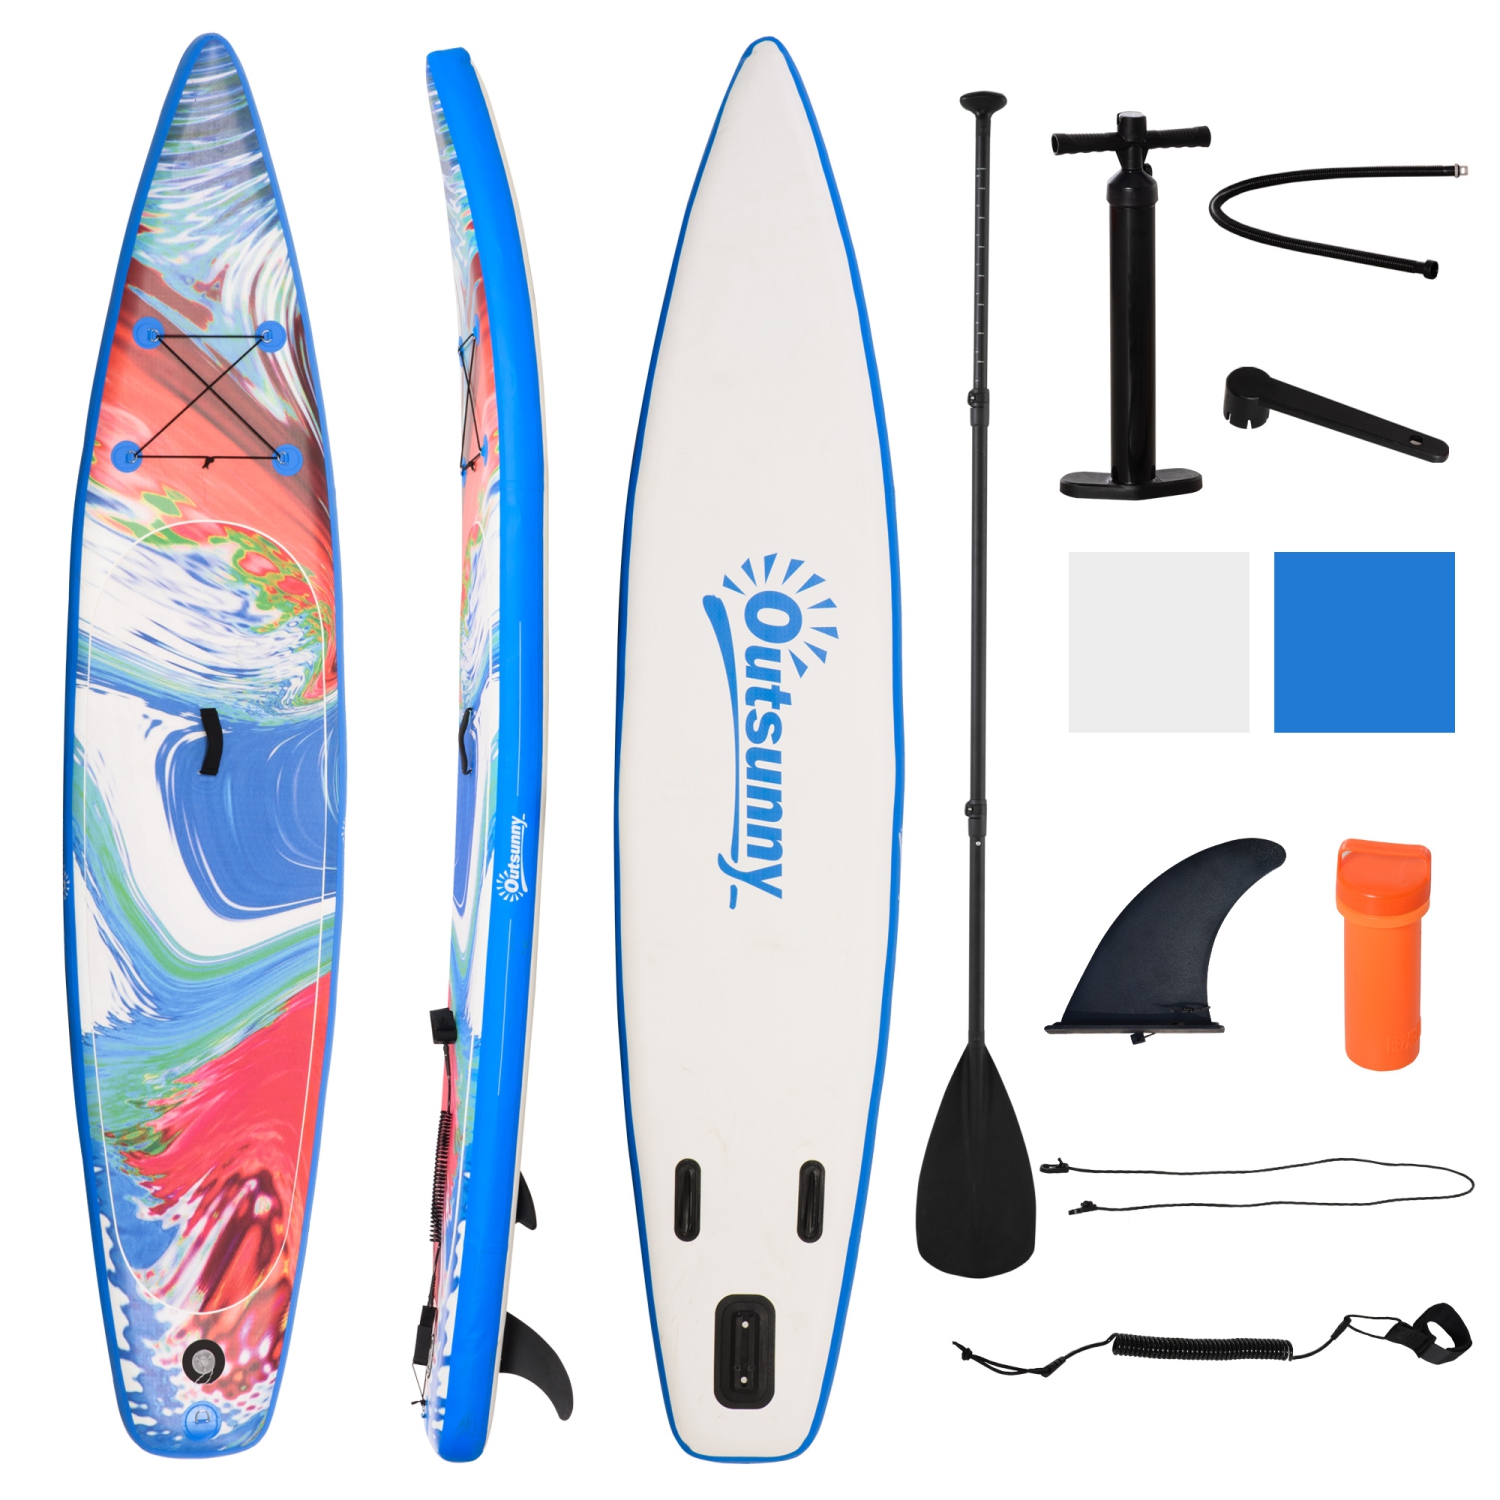 Outsunny Inflatable Stand Up Paddle Board, Adjustable Aluminum Paddle Non-Slip Deck Colorful Spray-painting Board with ISUP Accessories & Carry Bag, 143" x 30" x 6", Blue